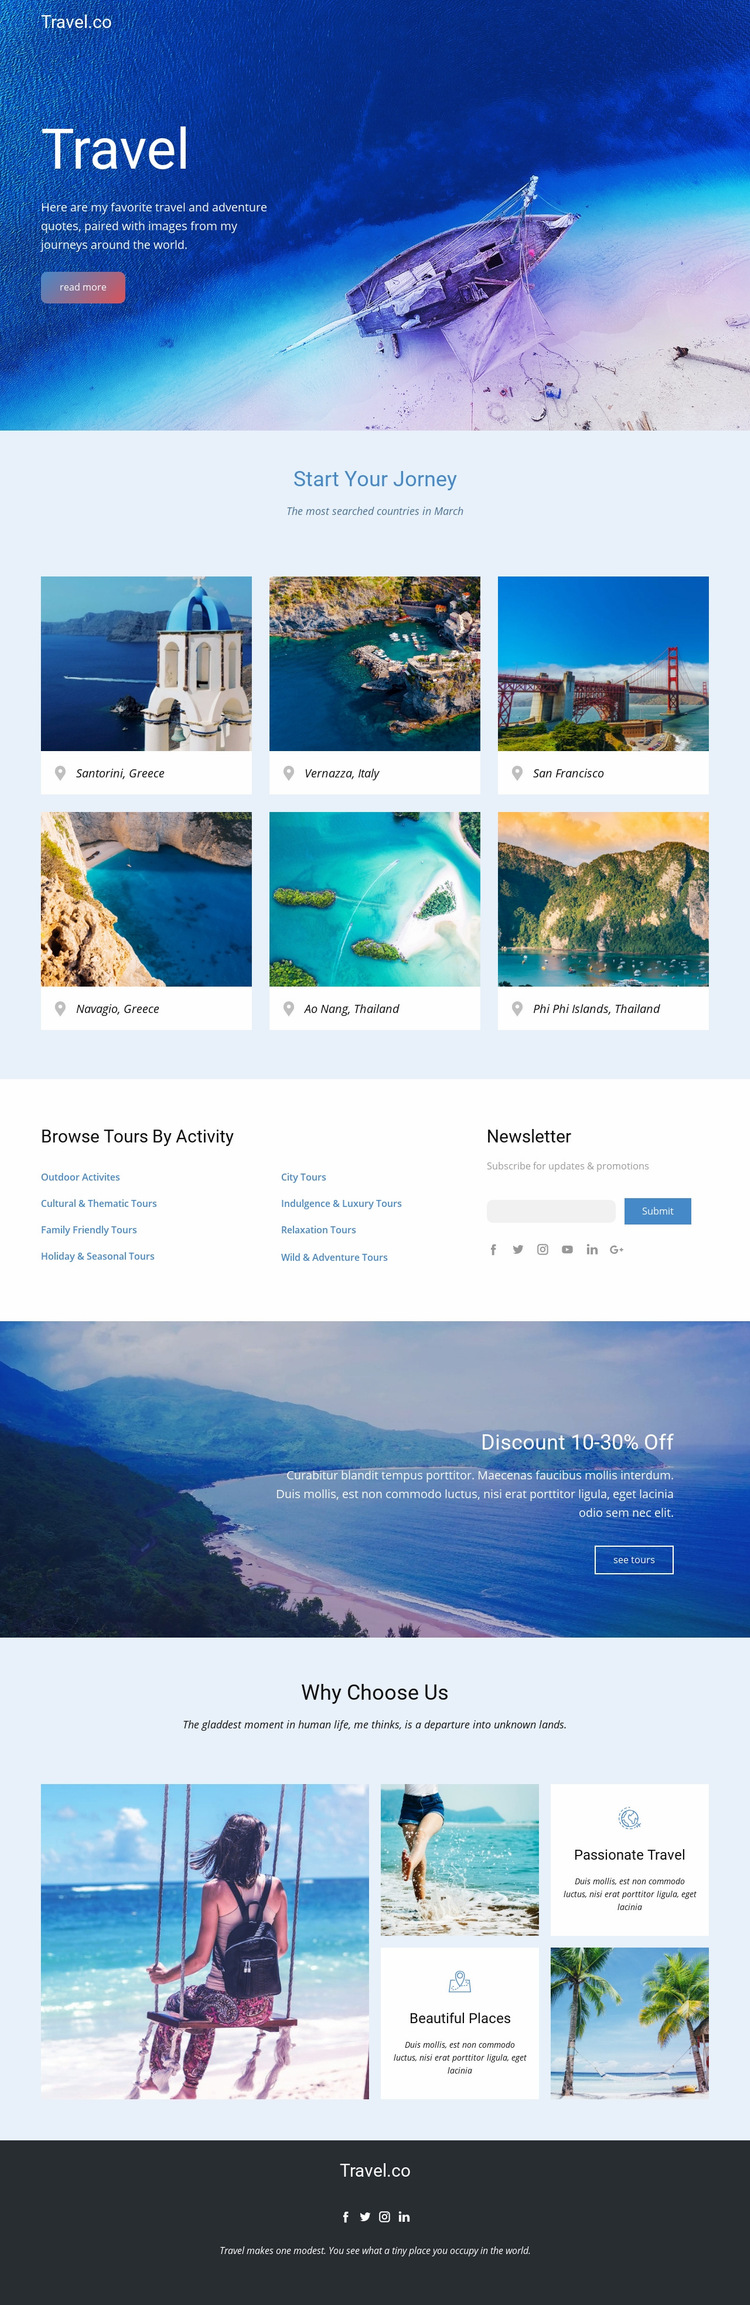 Amazing ideas for travel Web Page Design